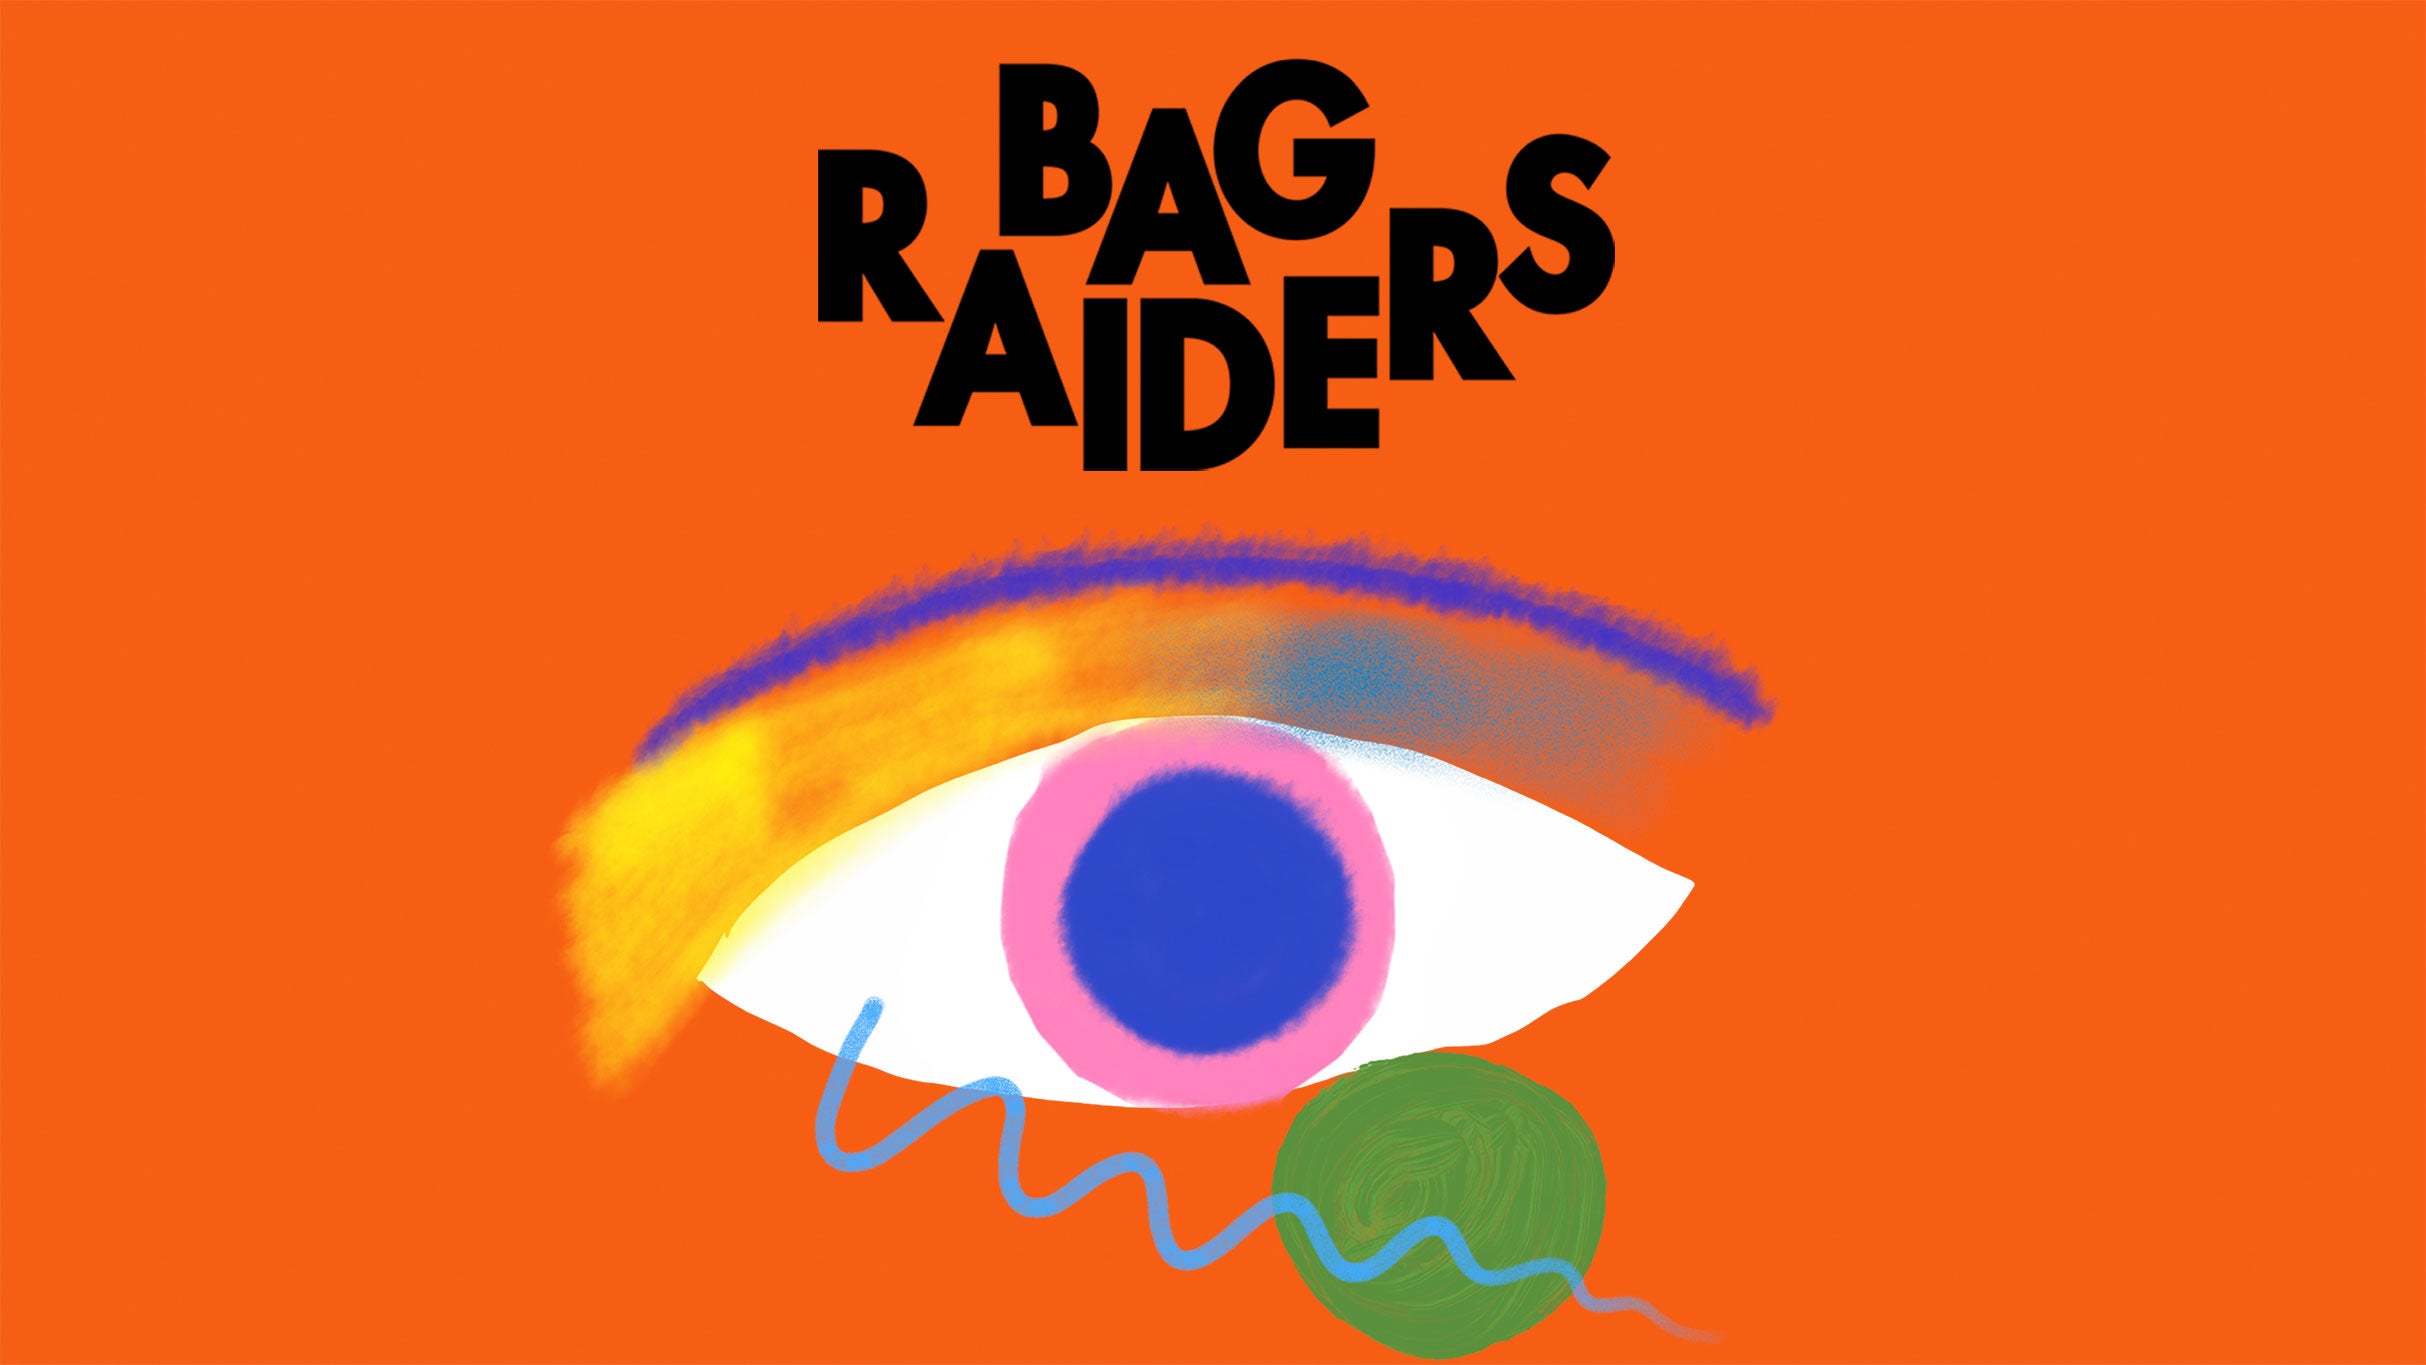 Bag Raiders at The Midway